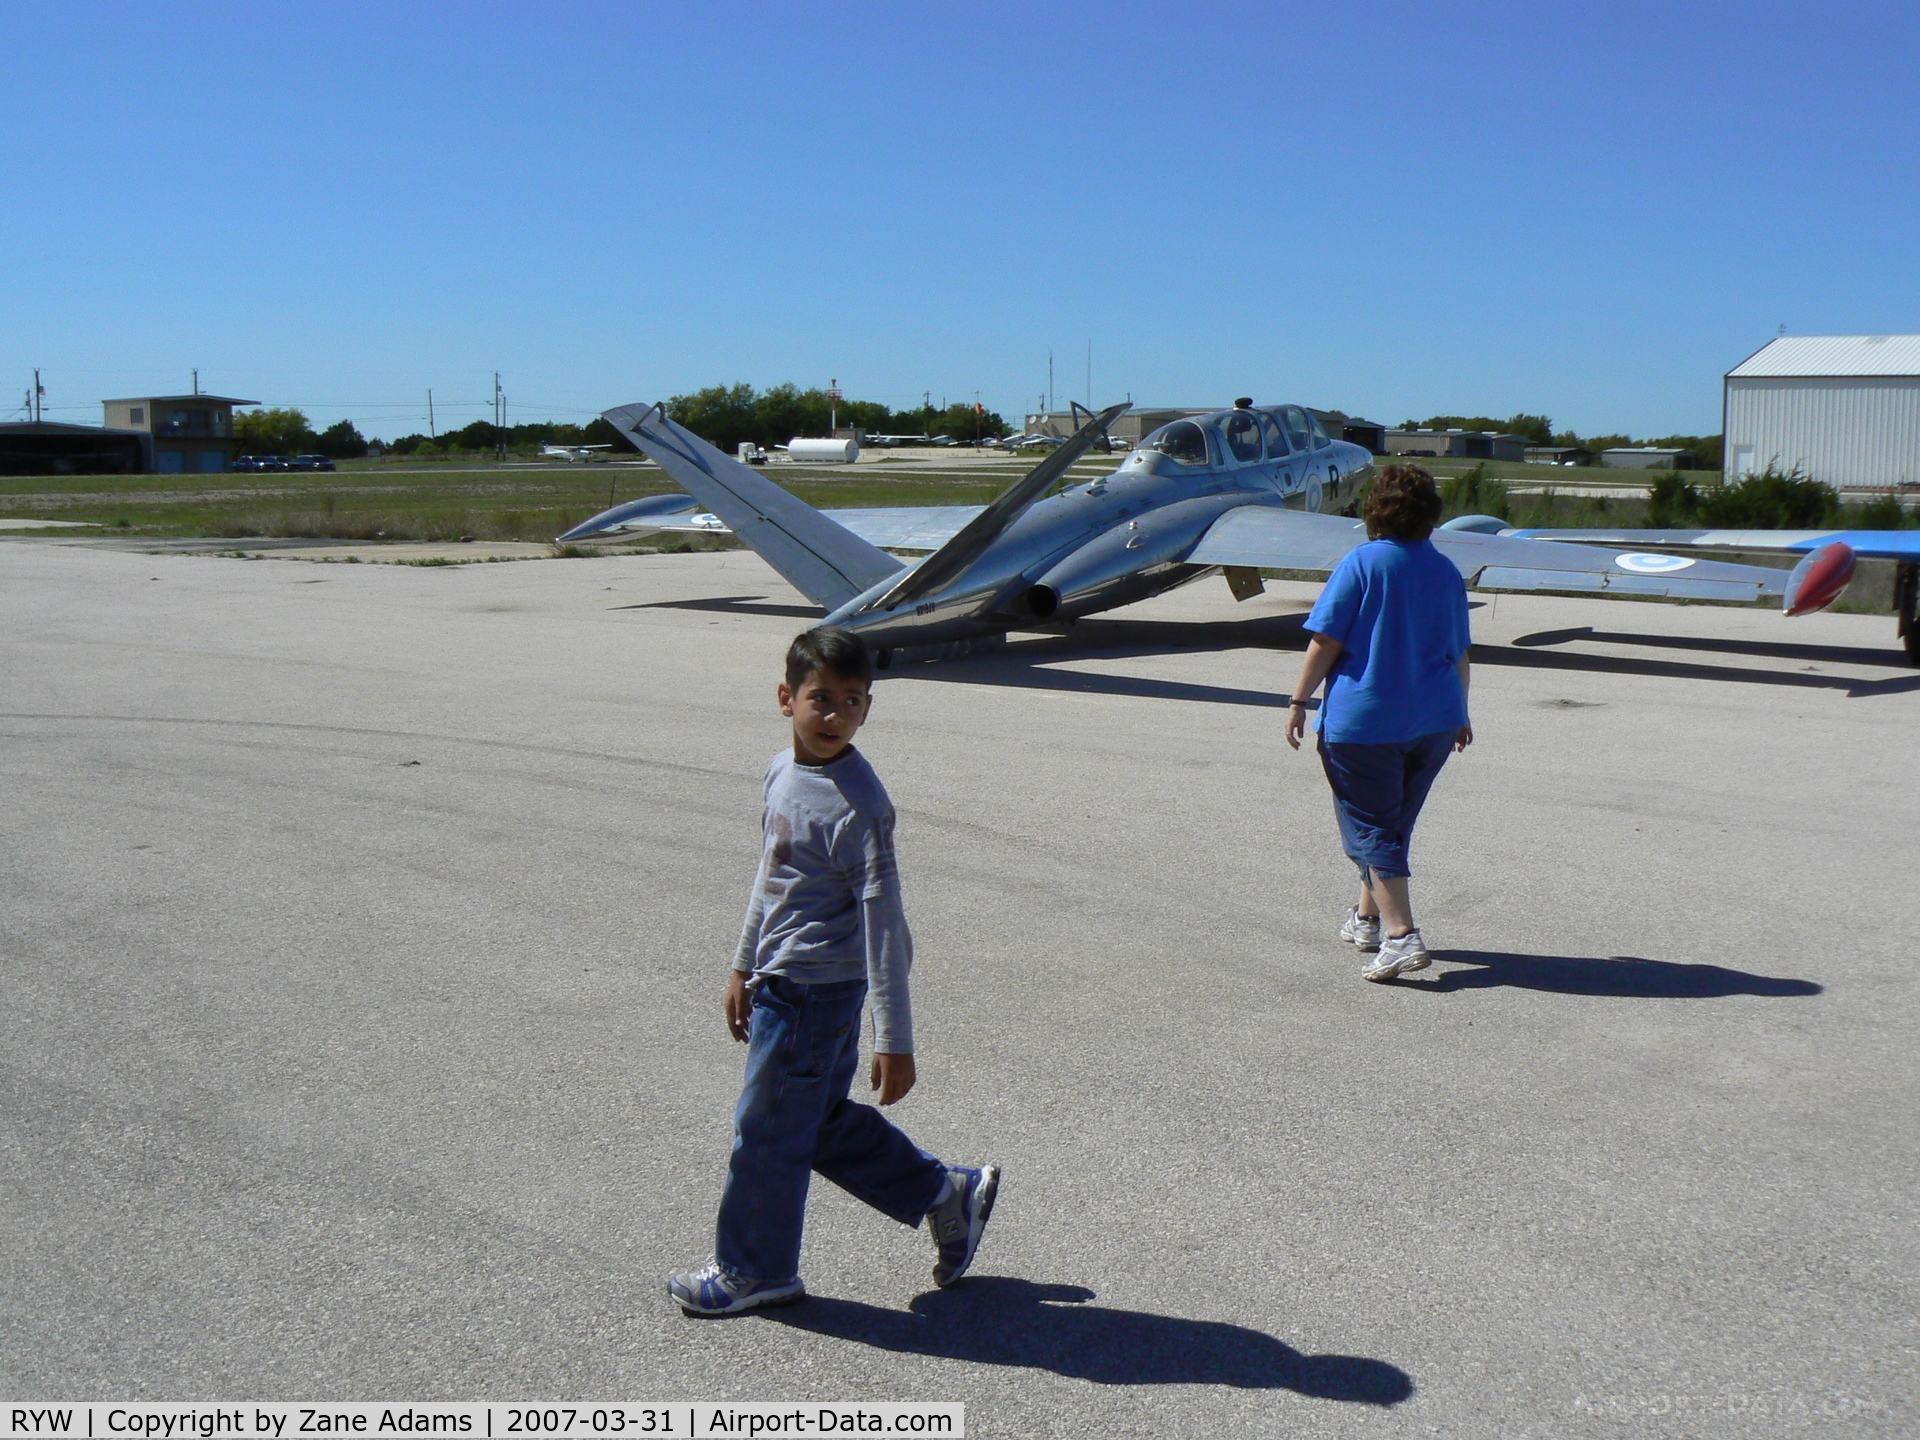 Lago Vista Tx - Rusty Allen Airport (RYW) - Mr Dill and a freind looking at the Jets - Lago Vista Airport